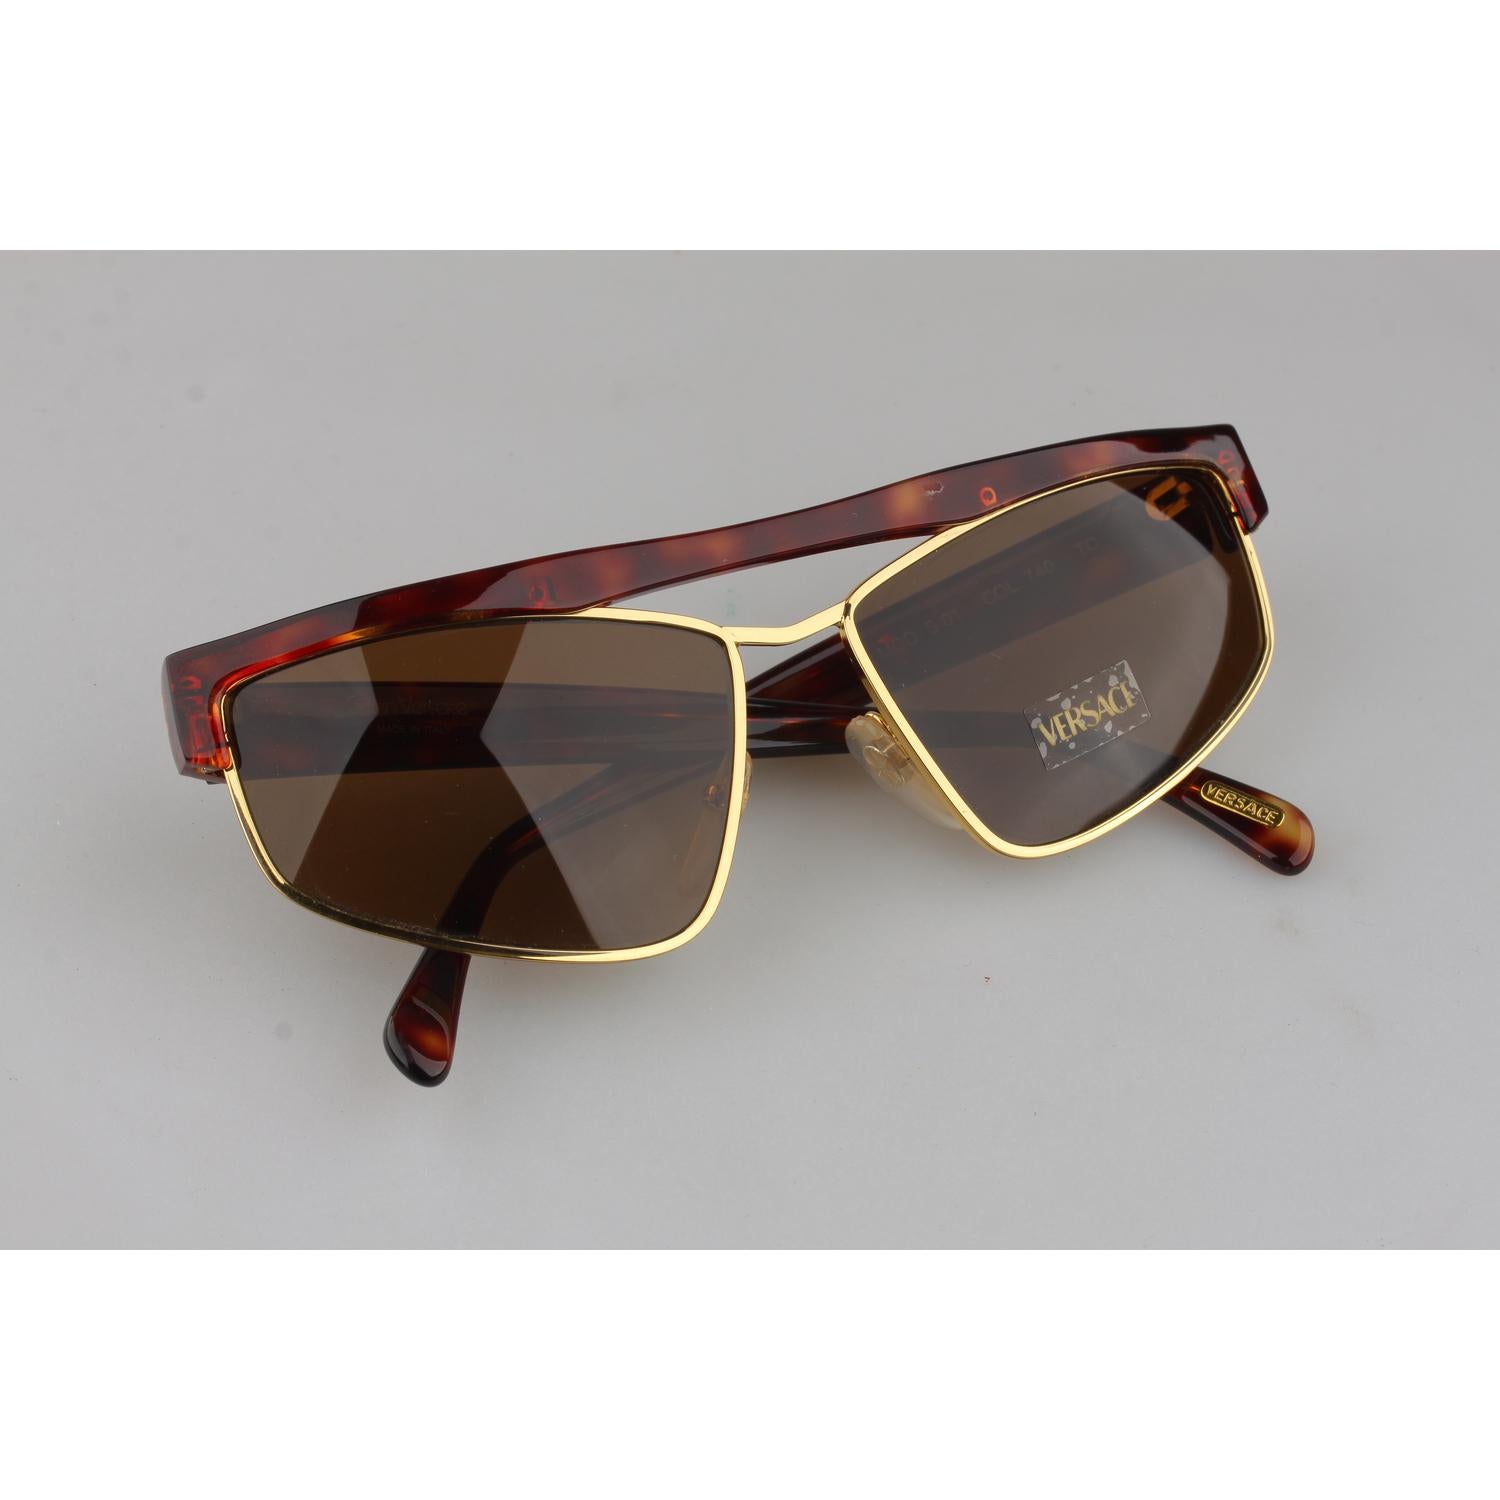 Gianni Versace Vintage Brown Sunglasses Mod. S01 Col 740 New Old Stock  5